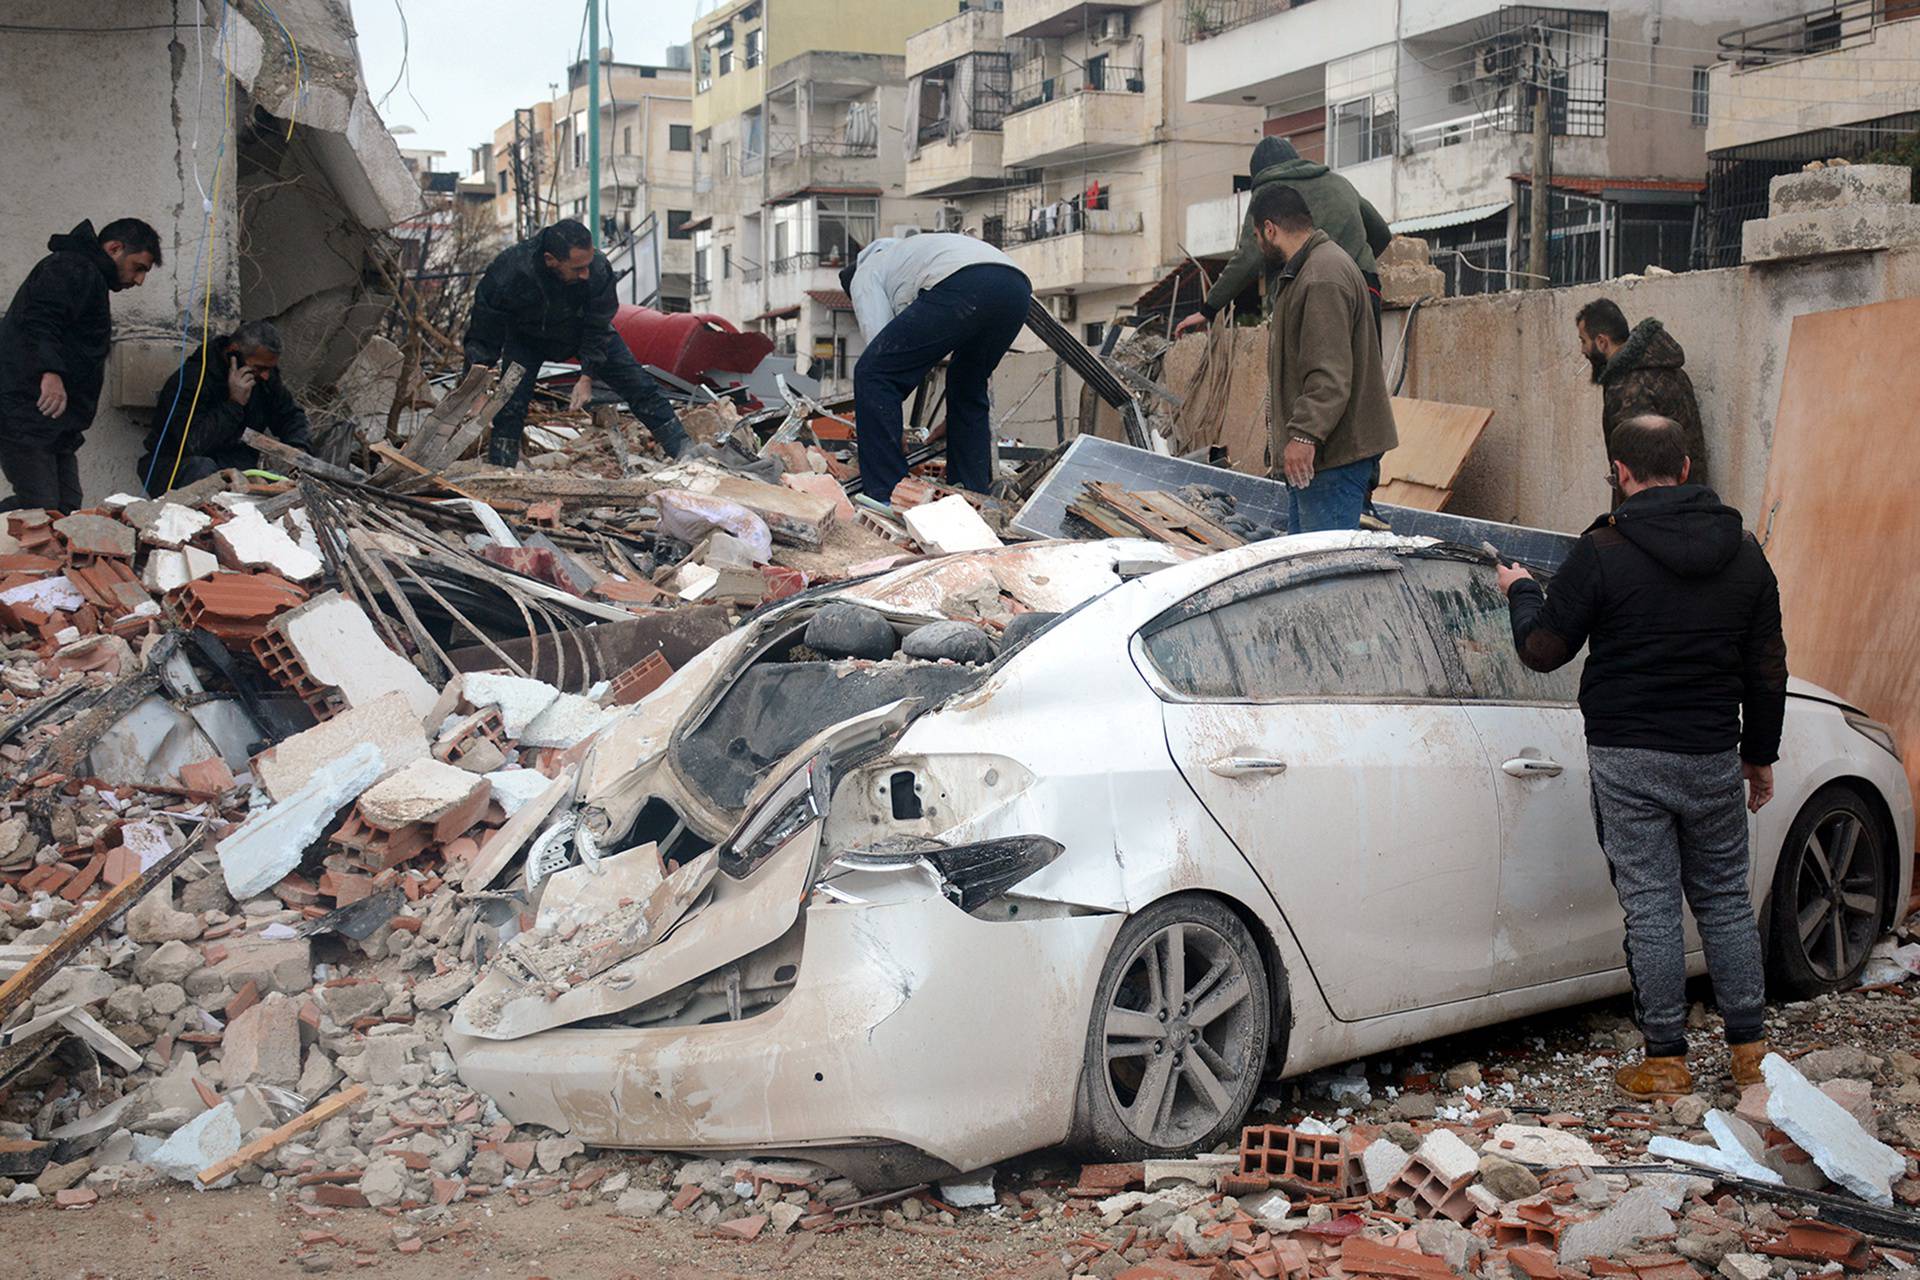 Rescuers search for survivors at the site of a collapsed building, following an earthquake, in Latakia